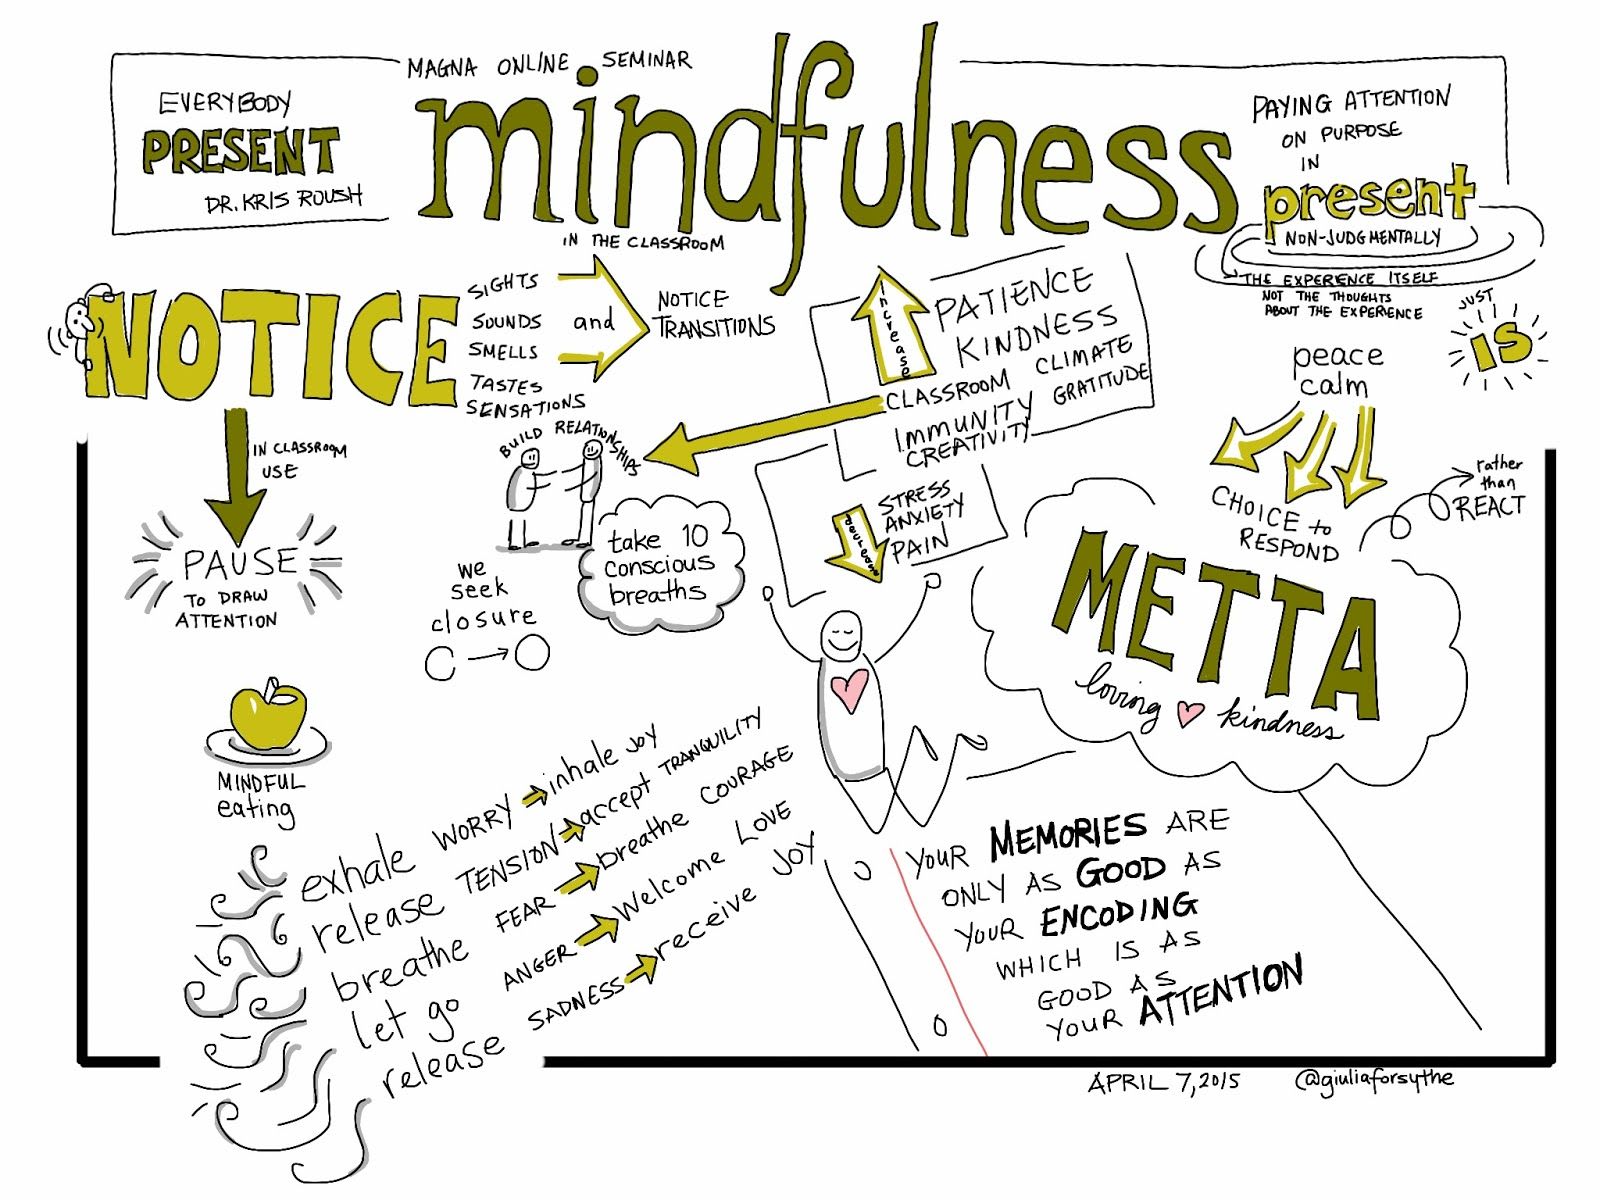 Handwritten notes on mindfulness and loving kindness: paying attention on purpose